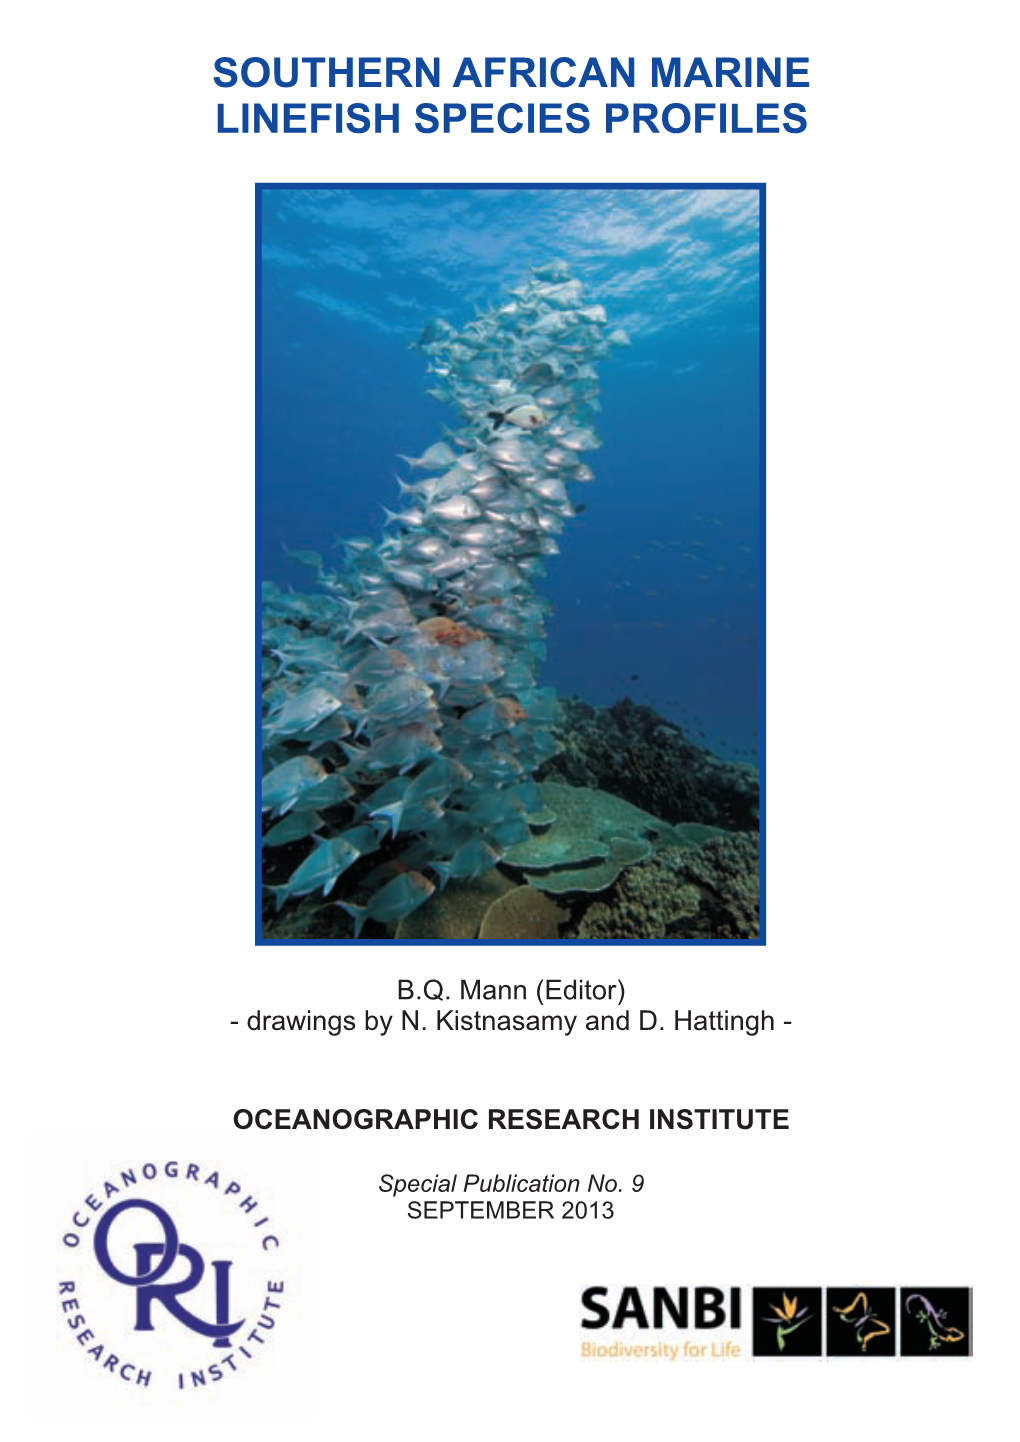 Southern African Marine Linefish Species Profiles